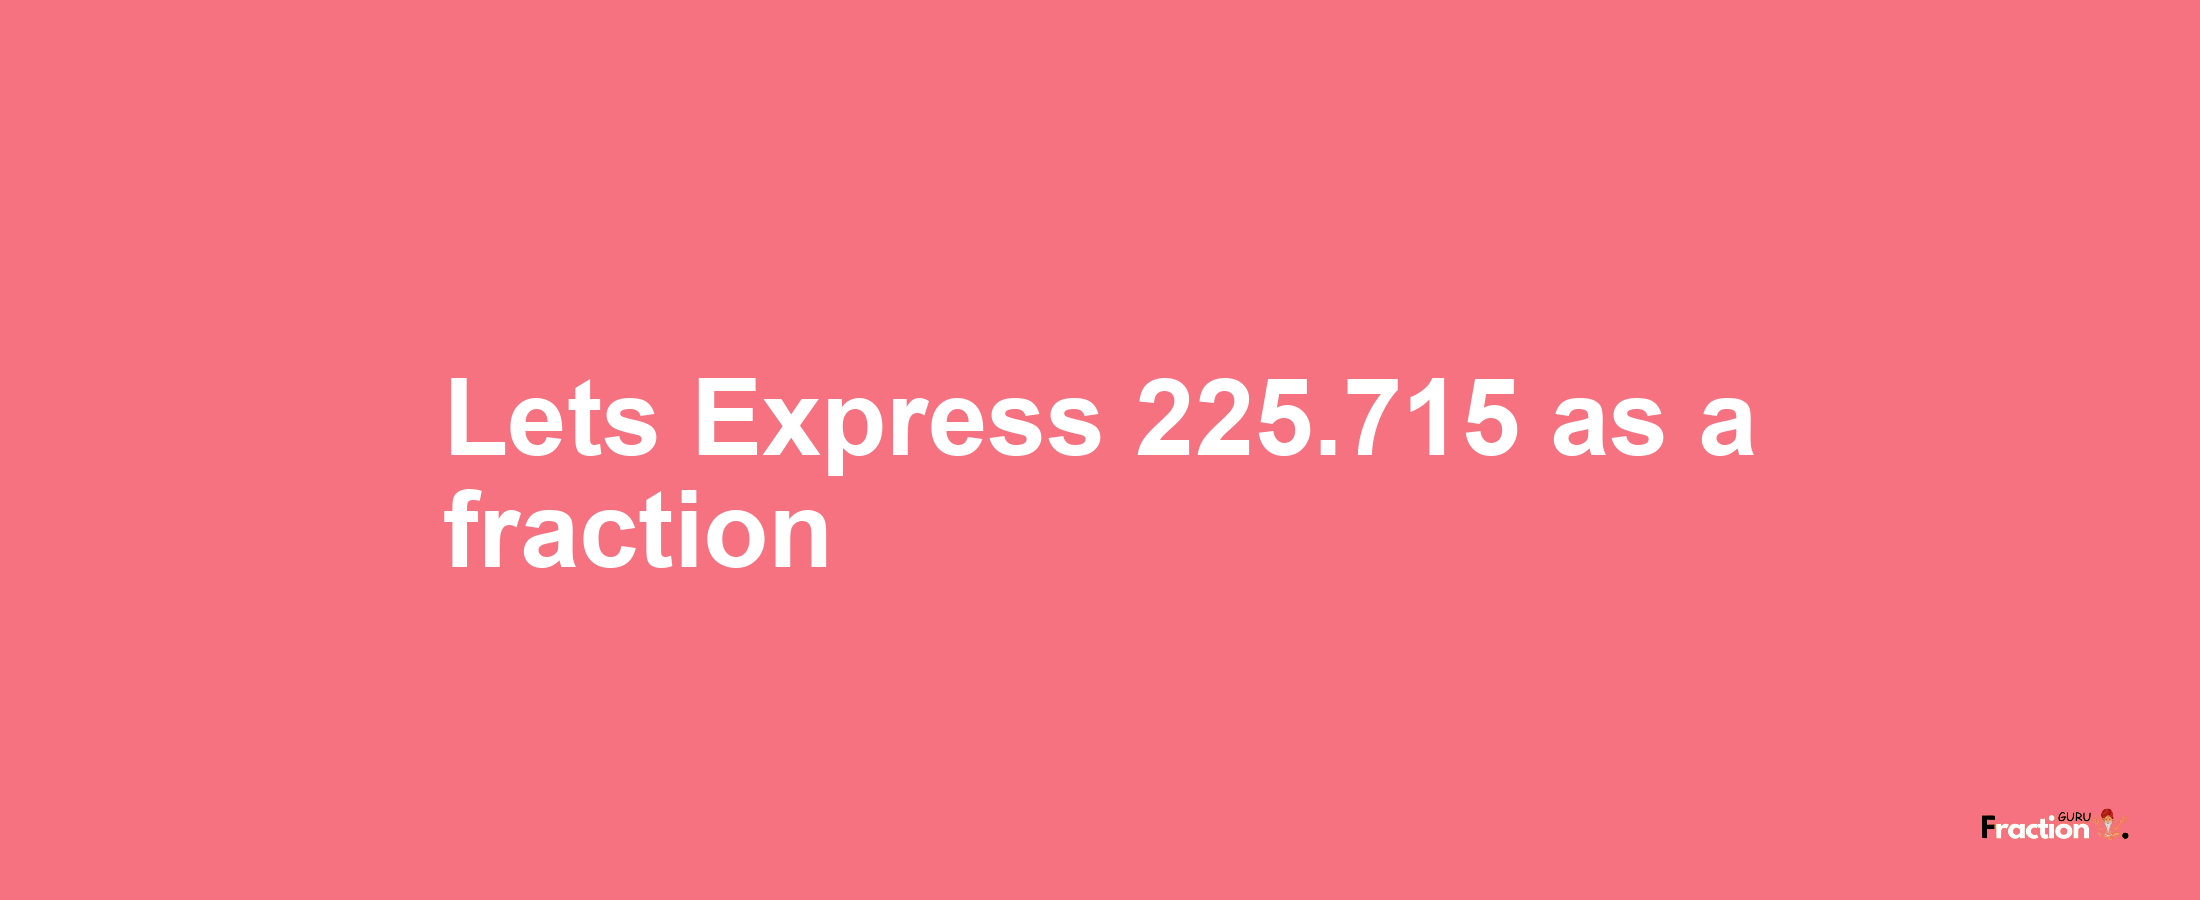 Lets Express 225.715 as afraction